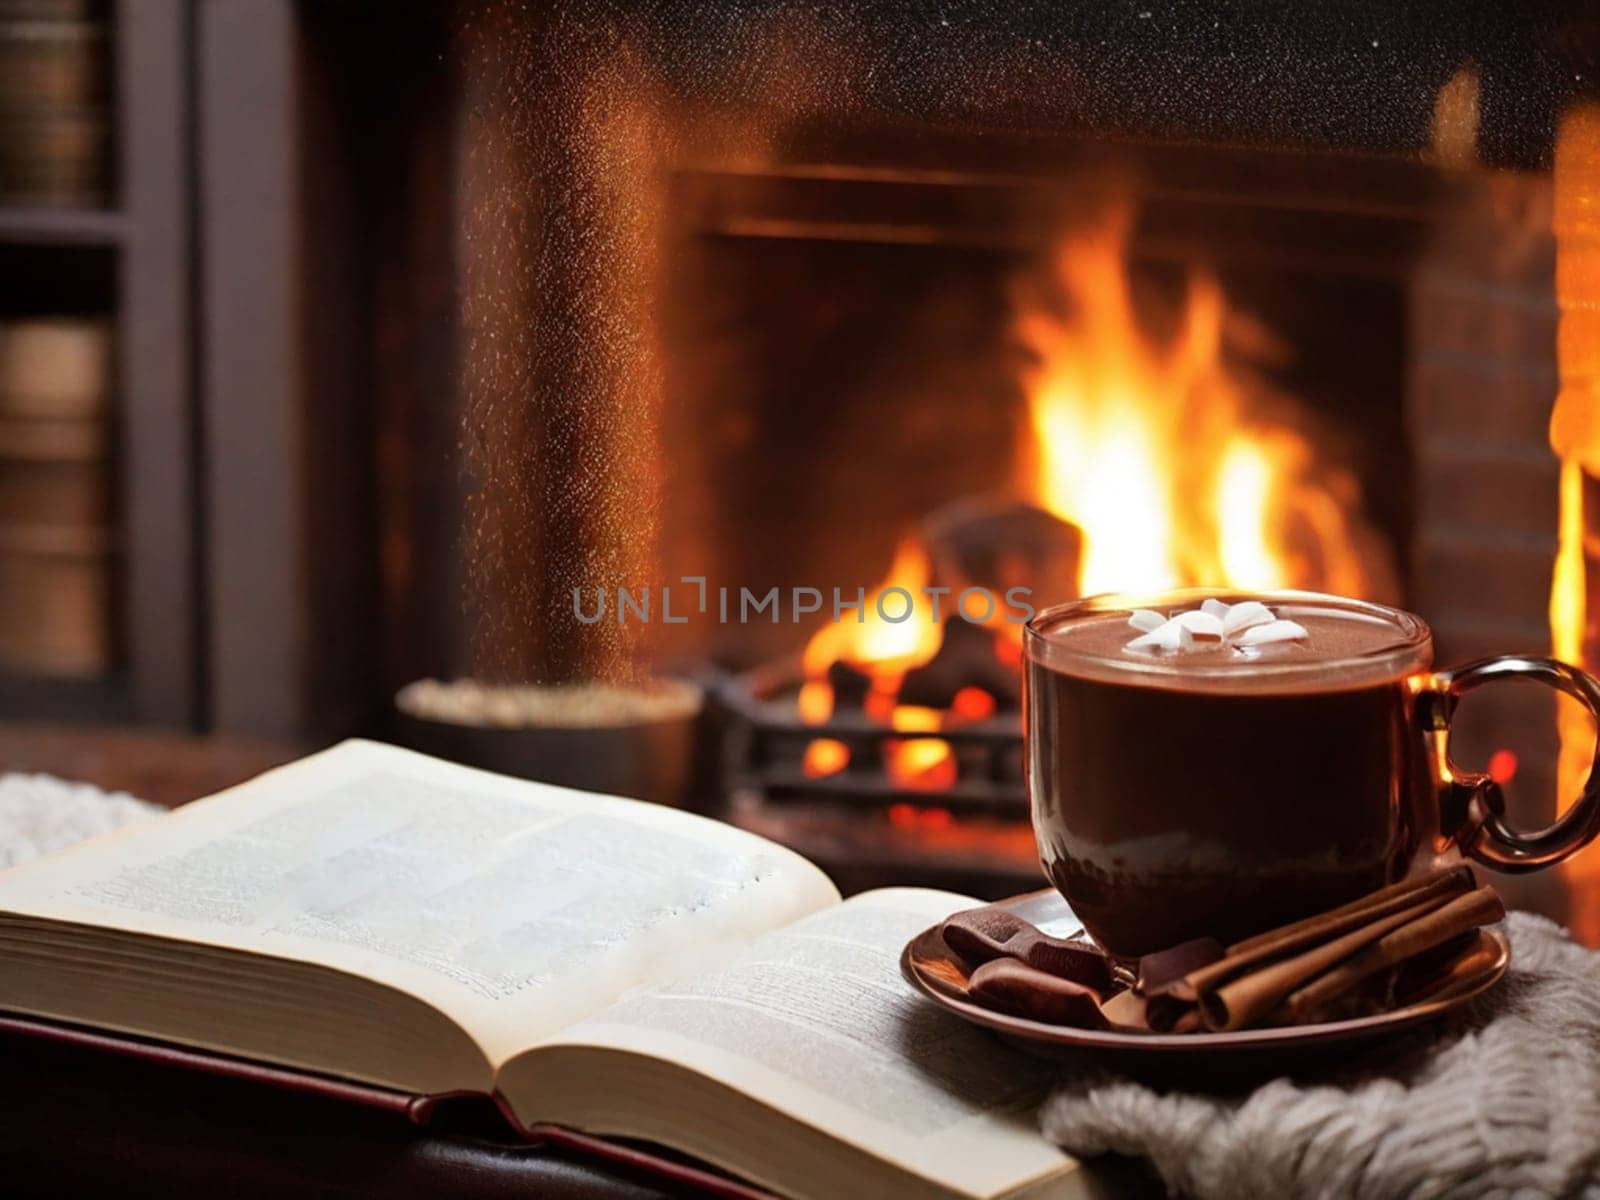 Cup of coffee and book on plaid near fireplace indoors. Cozy atmosphere.